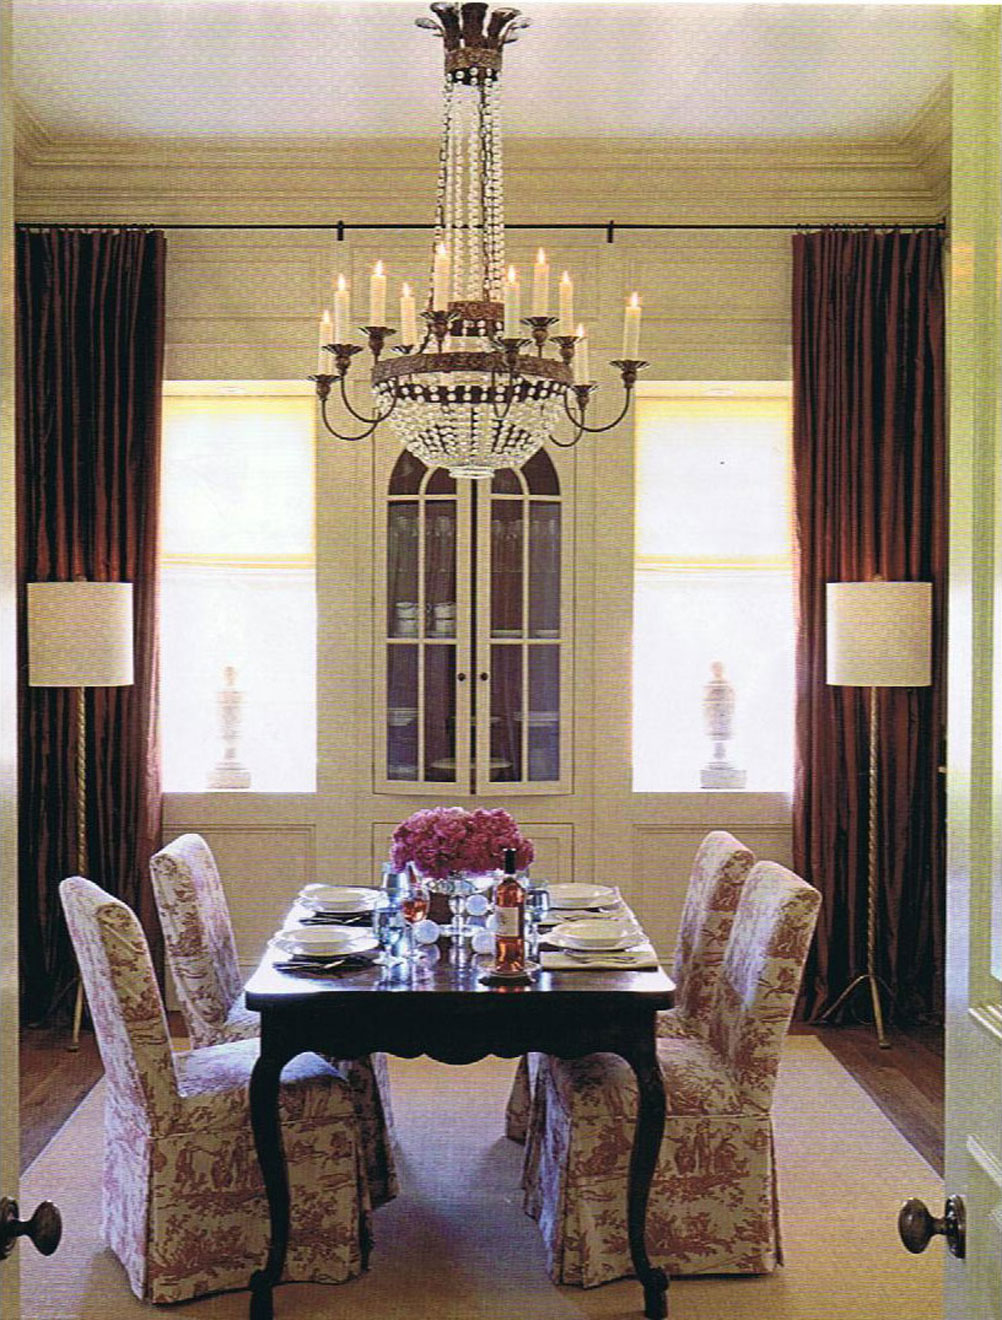 Dining Room 6 Glamorous Dining Room Furniture Table 6 Person Ideas With Beautiful Chandelier Design And Classy Black Wooden Dining Table Ideas Also Sweet Vase Flower Design Plus Traditional Thick Carpet Ideas Dining Room Modern Dining Room Furniture Design